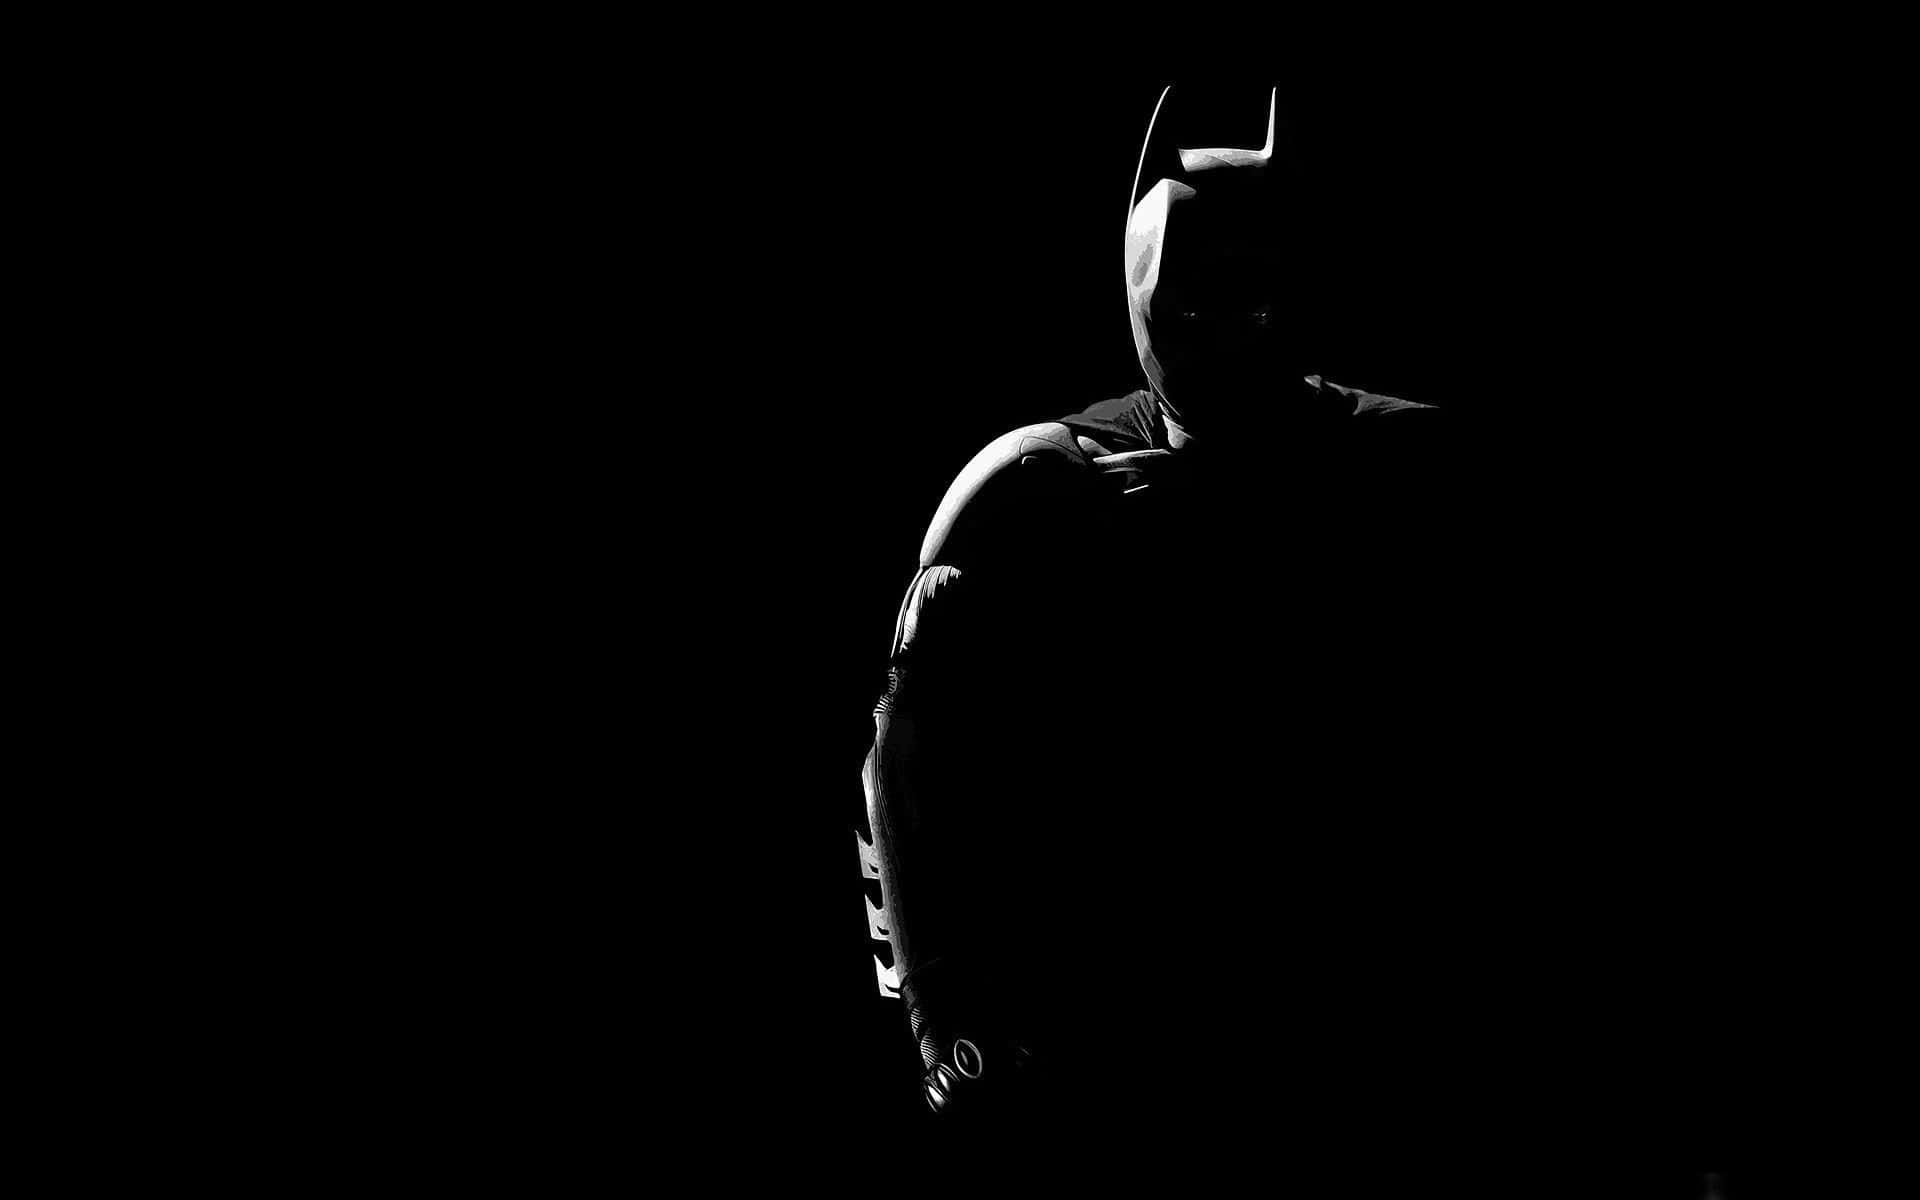 Batman In The Dark Silhouetted Against A Black Background Wallpaper